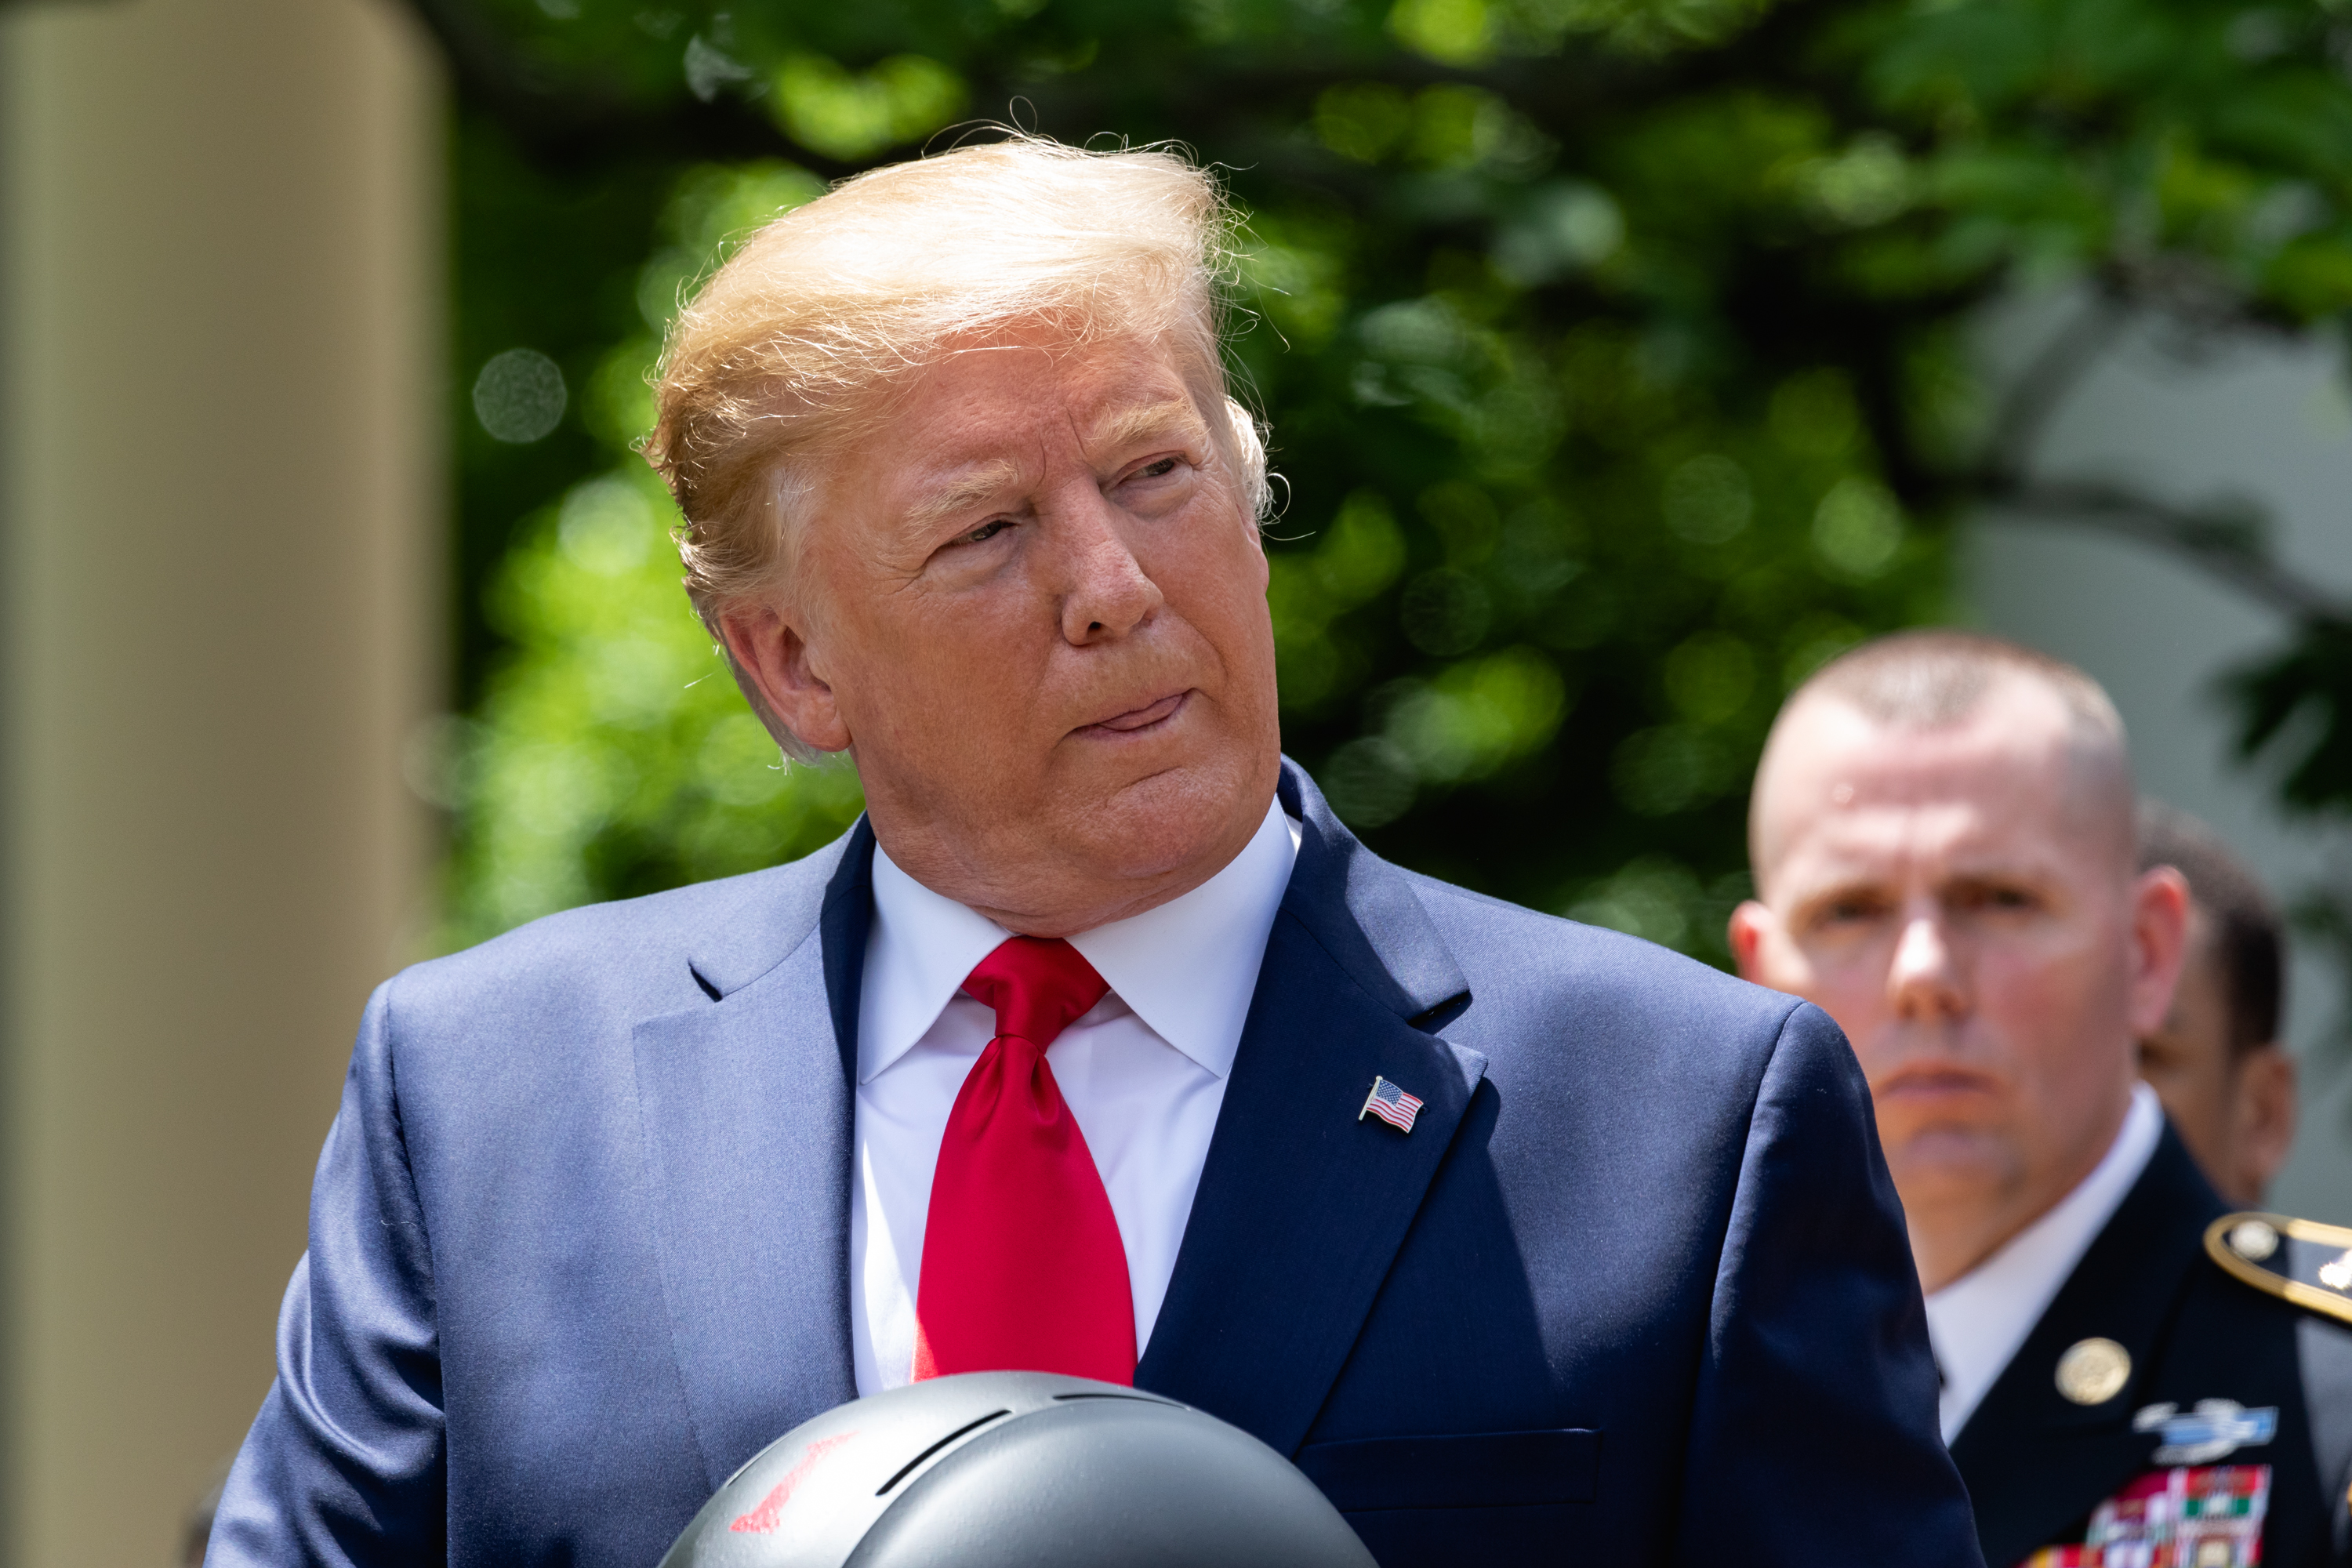 President Donald Trump listens during the presentation of the Commander-in-Chief's Trophy to the U.S. Military Academy football team, the Army Black Knights, in the Rose Garden of the White House in Washington, D.C., on Monday, May 6, 2019. (Cheriss May—NurPhoto via Getty Images)